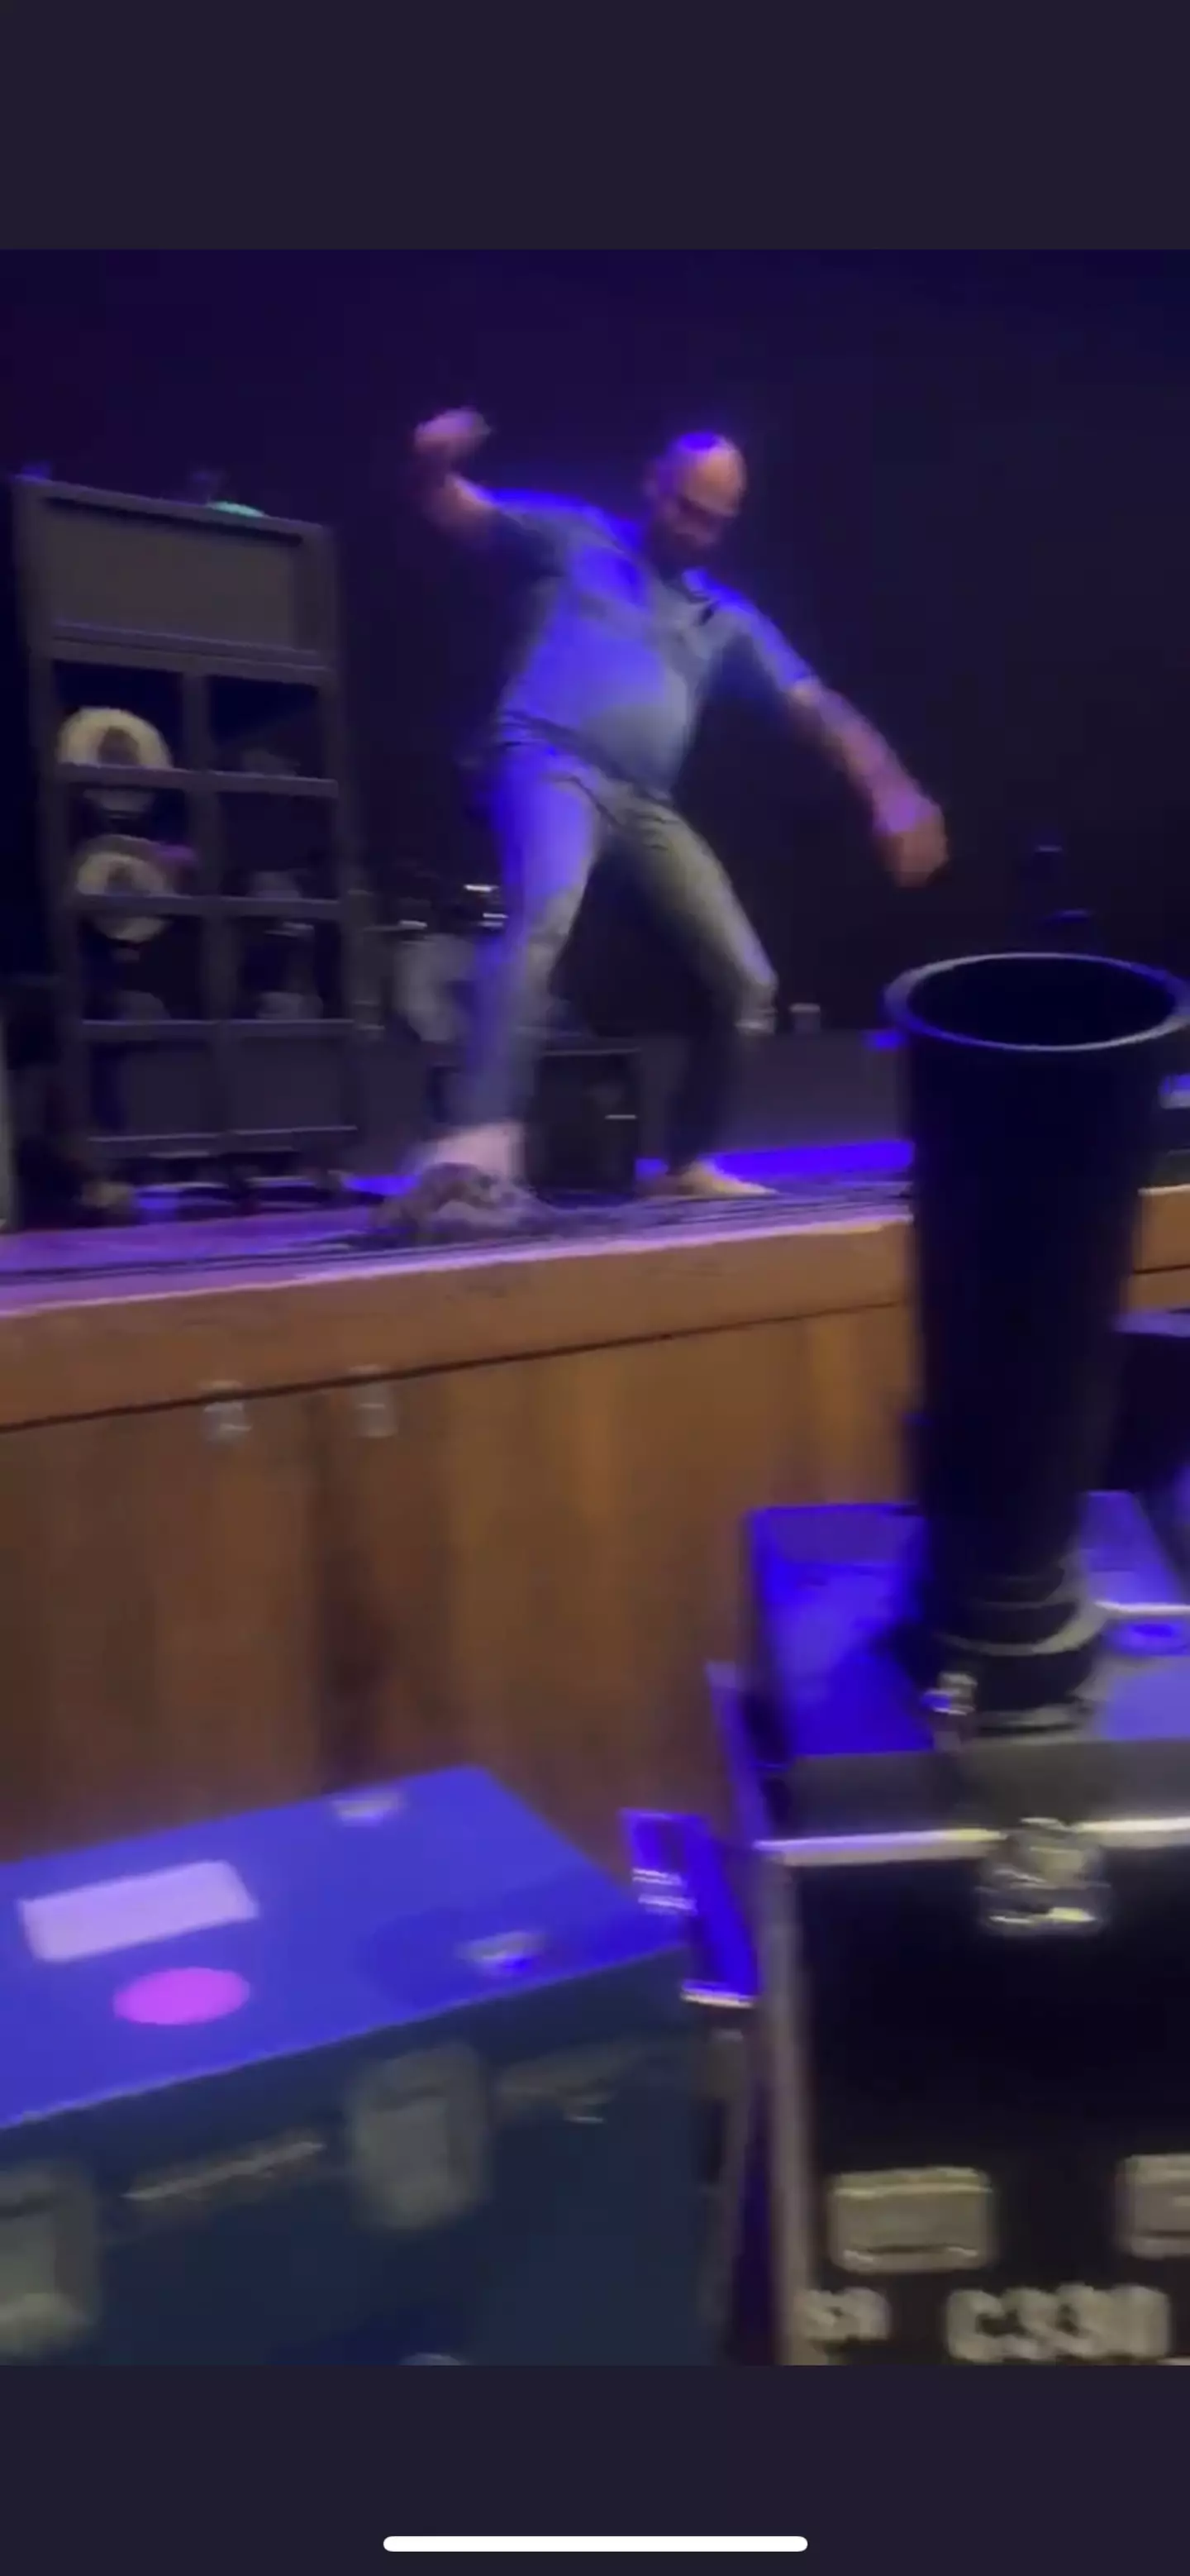 A security guard was seen kicking what appeared to be a squirrel off the stage.